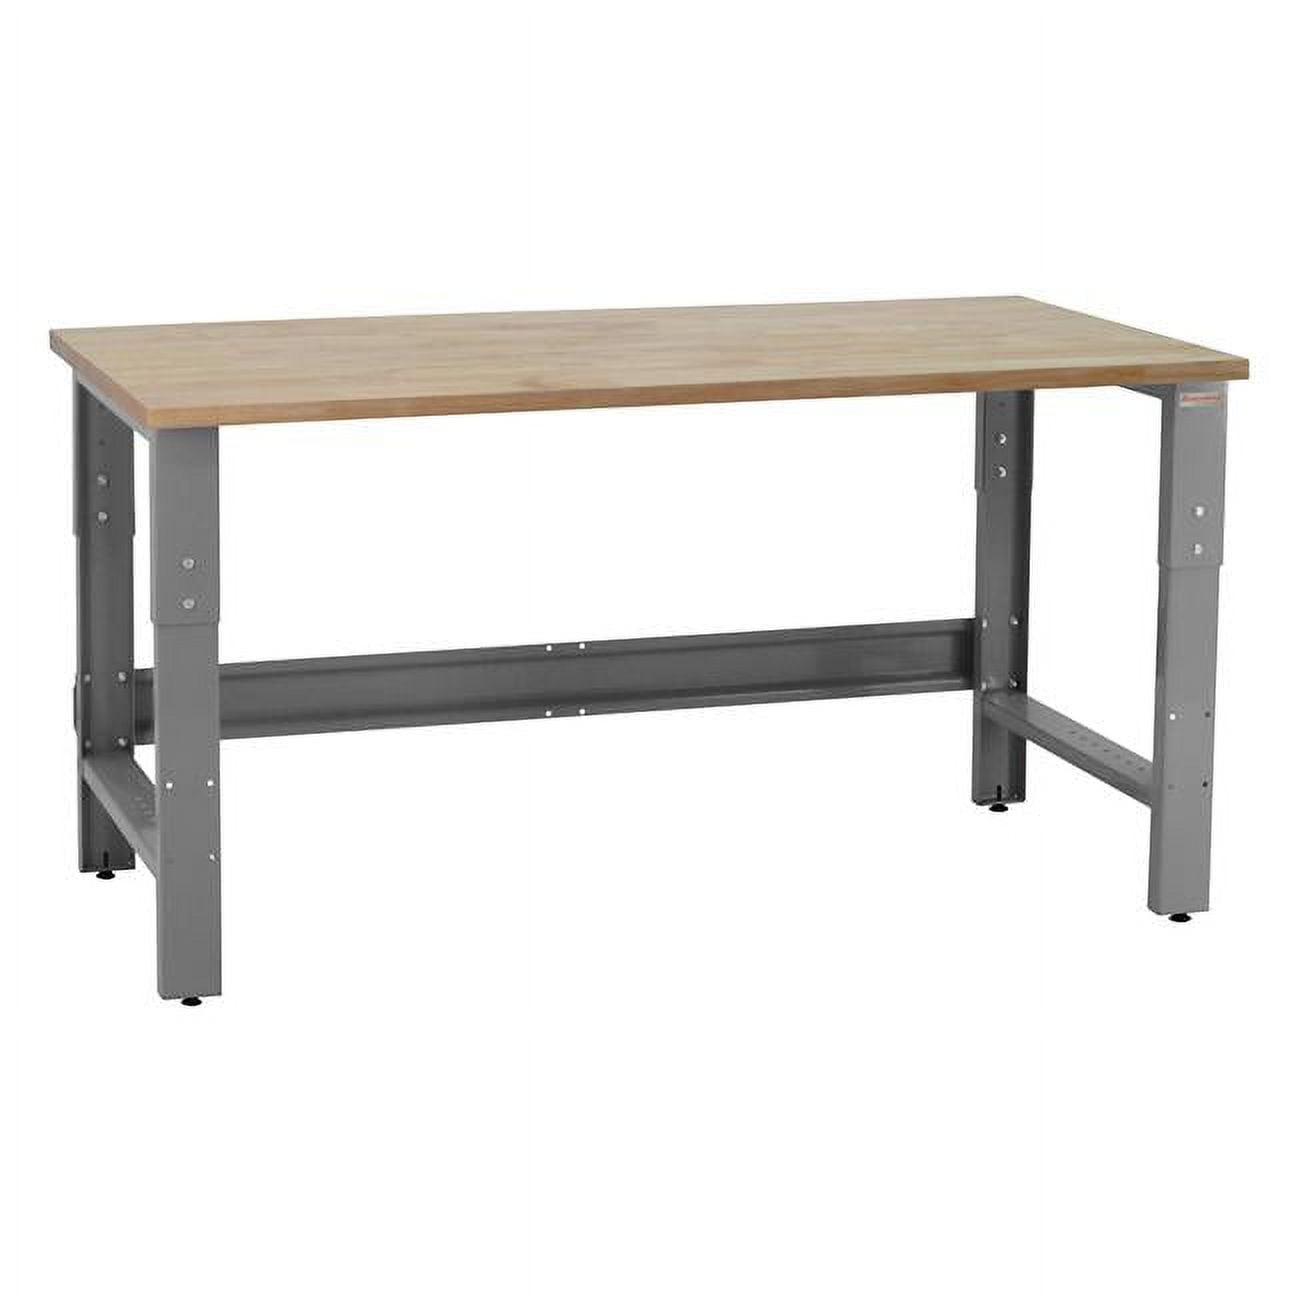 24 x 60 x 30 to 36 in. Adjustable Height Roosevelt Workbenches with 1.75 in. Thick Solid Maple Oiled Butcher Block Top, Gray -  KD Gabinetes, KD2191913